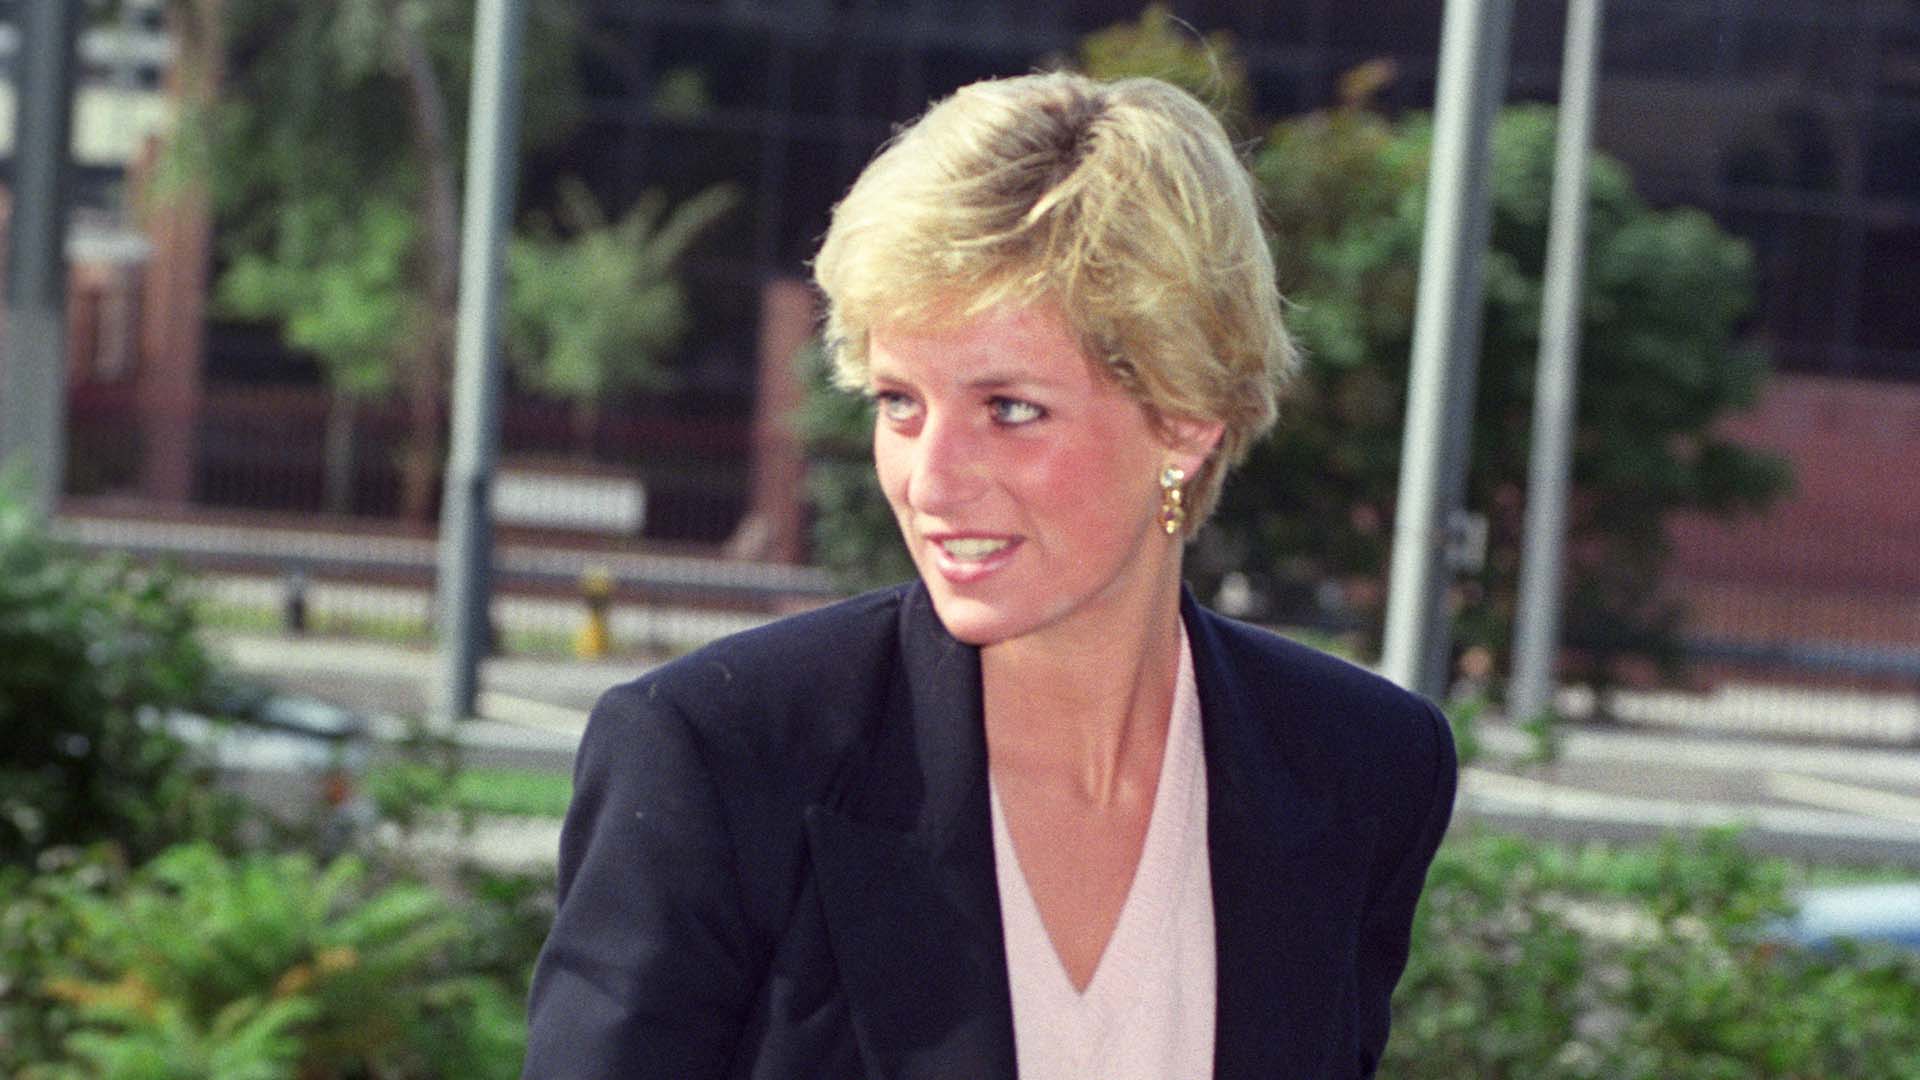 Princess Diana arrives at the Queen's Medical Centre, University of Nottingham, to visit Prince Charles after his operation.